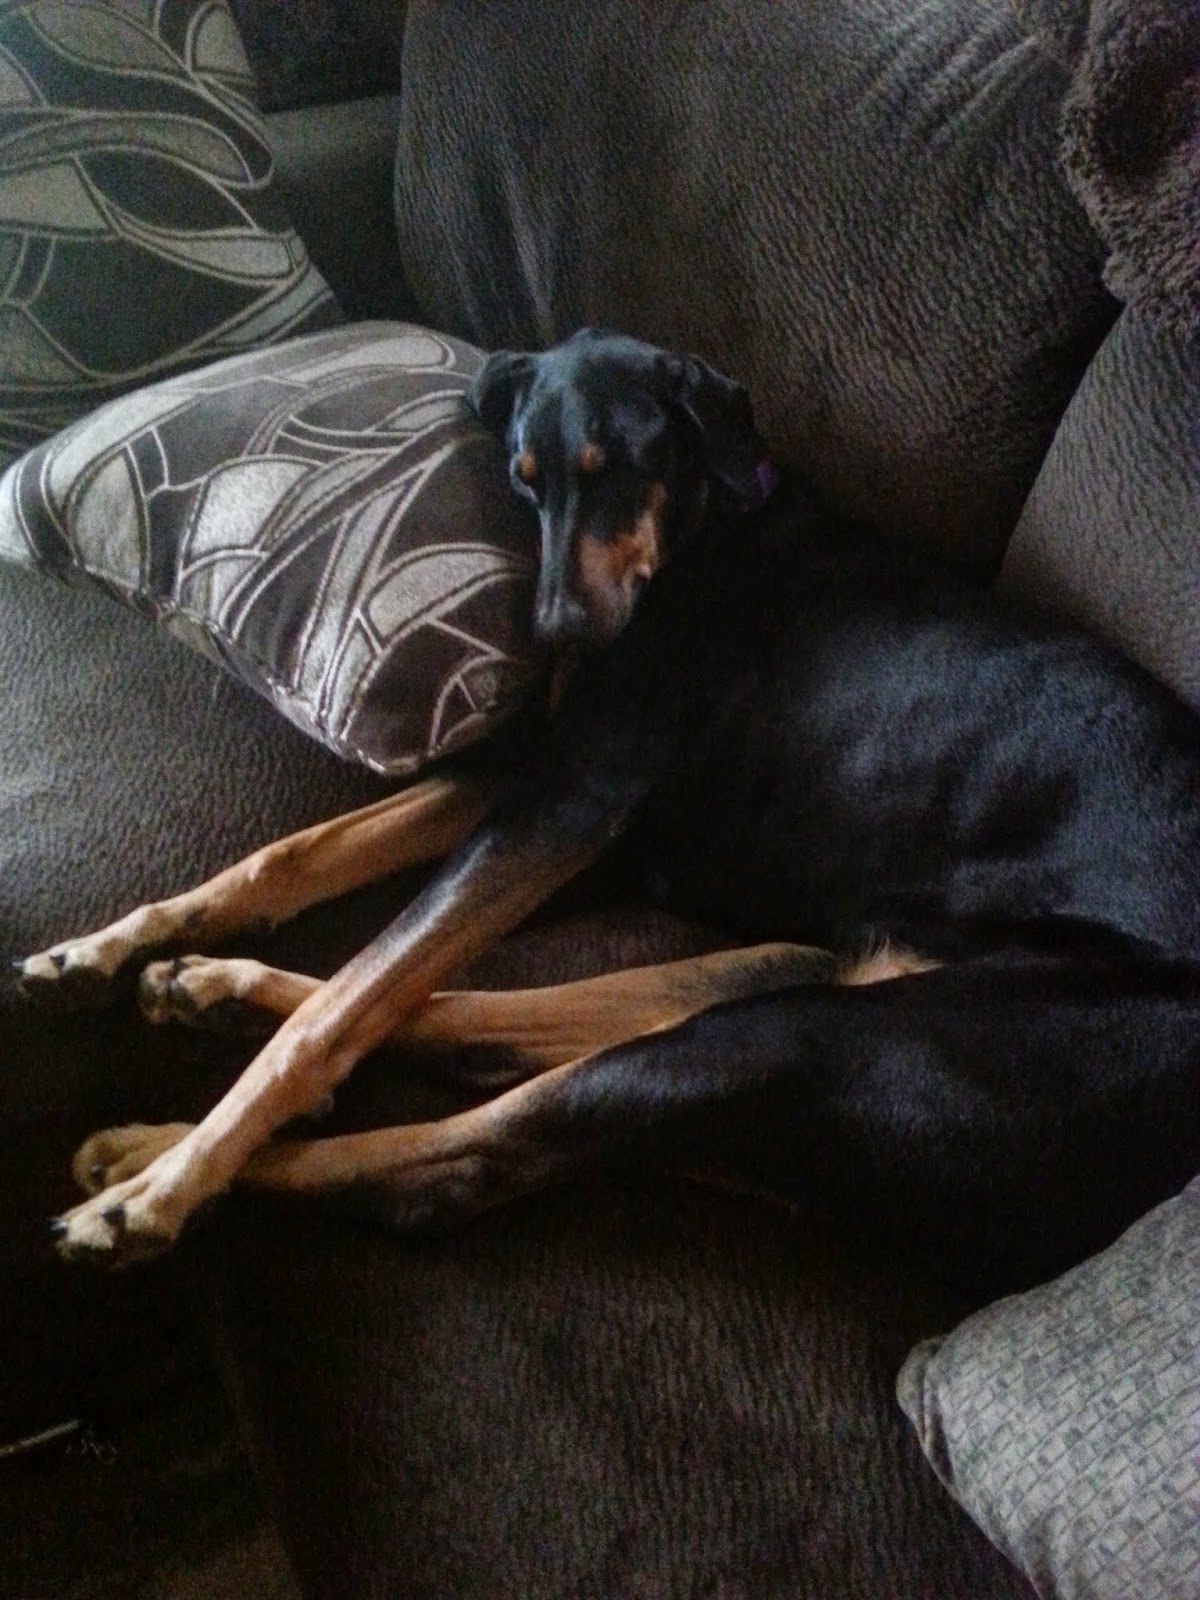 Lily the doberman napping on pillow.